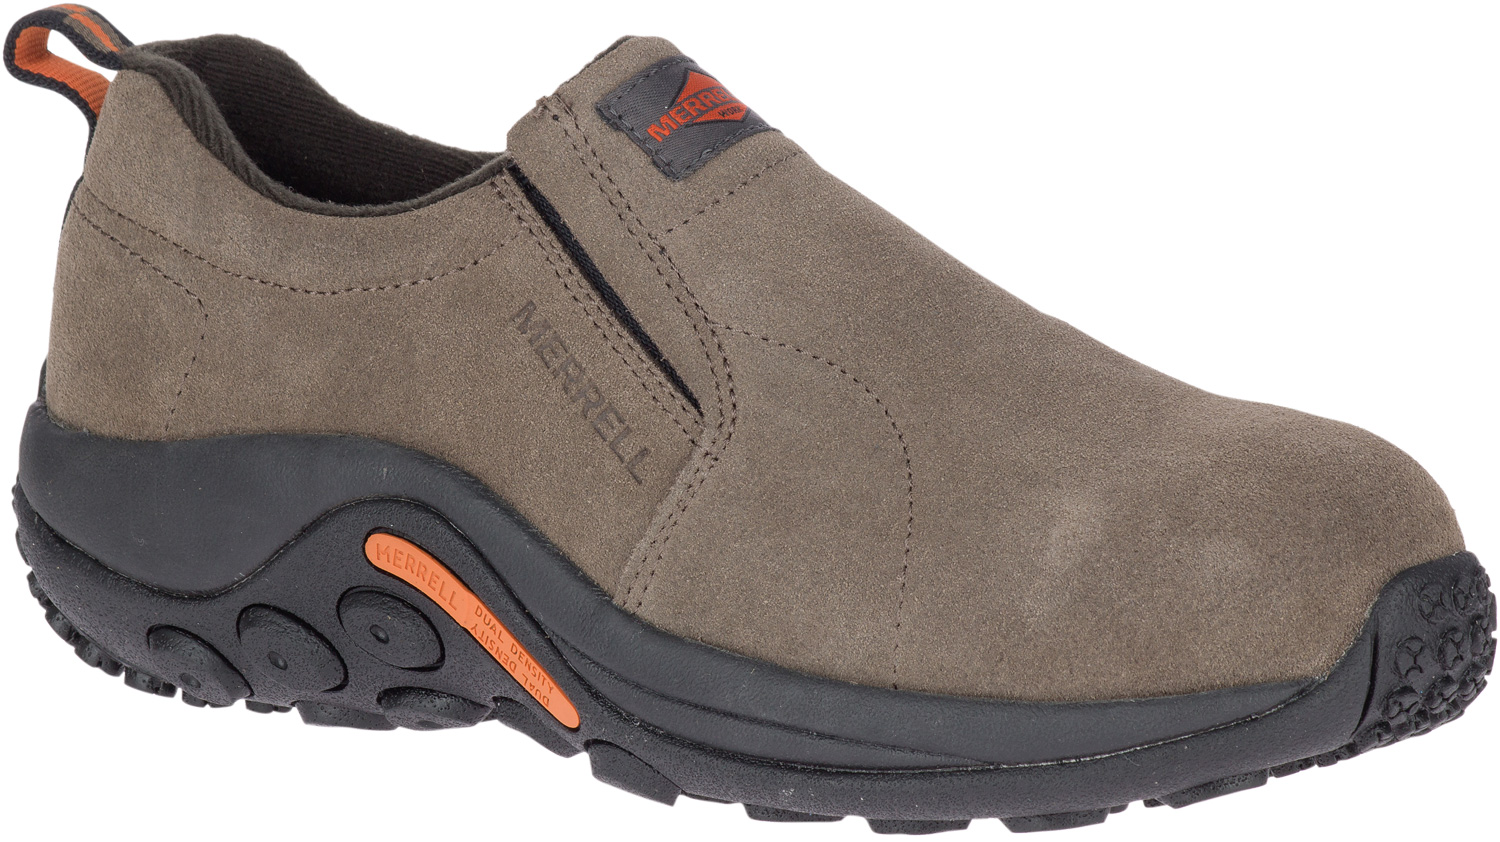 Lehigh Valley Safety Shoes | MLJ05356 Merrell Women's Alloy Toe EH ...